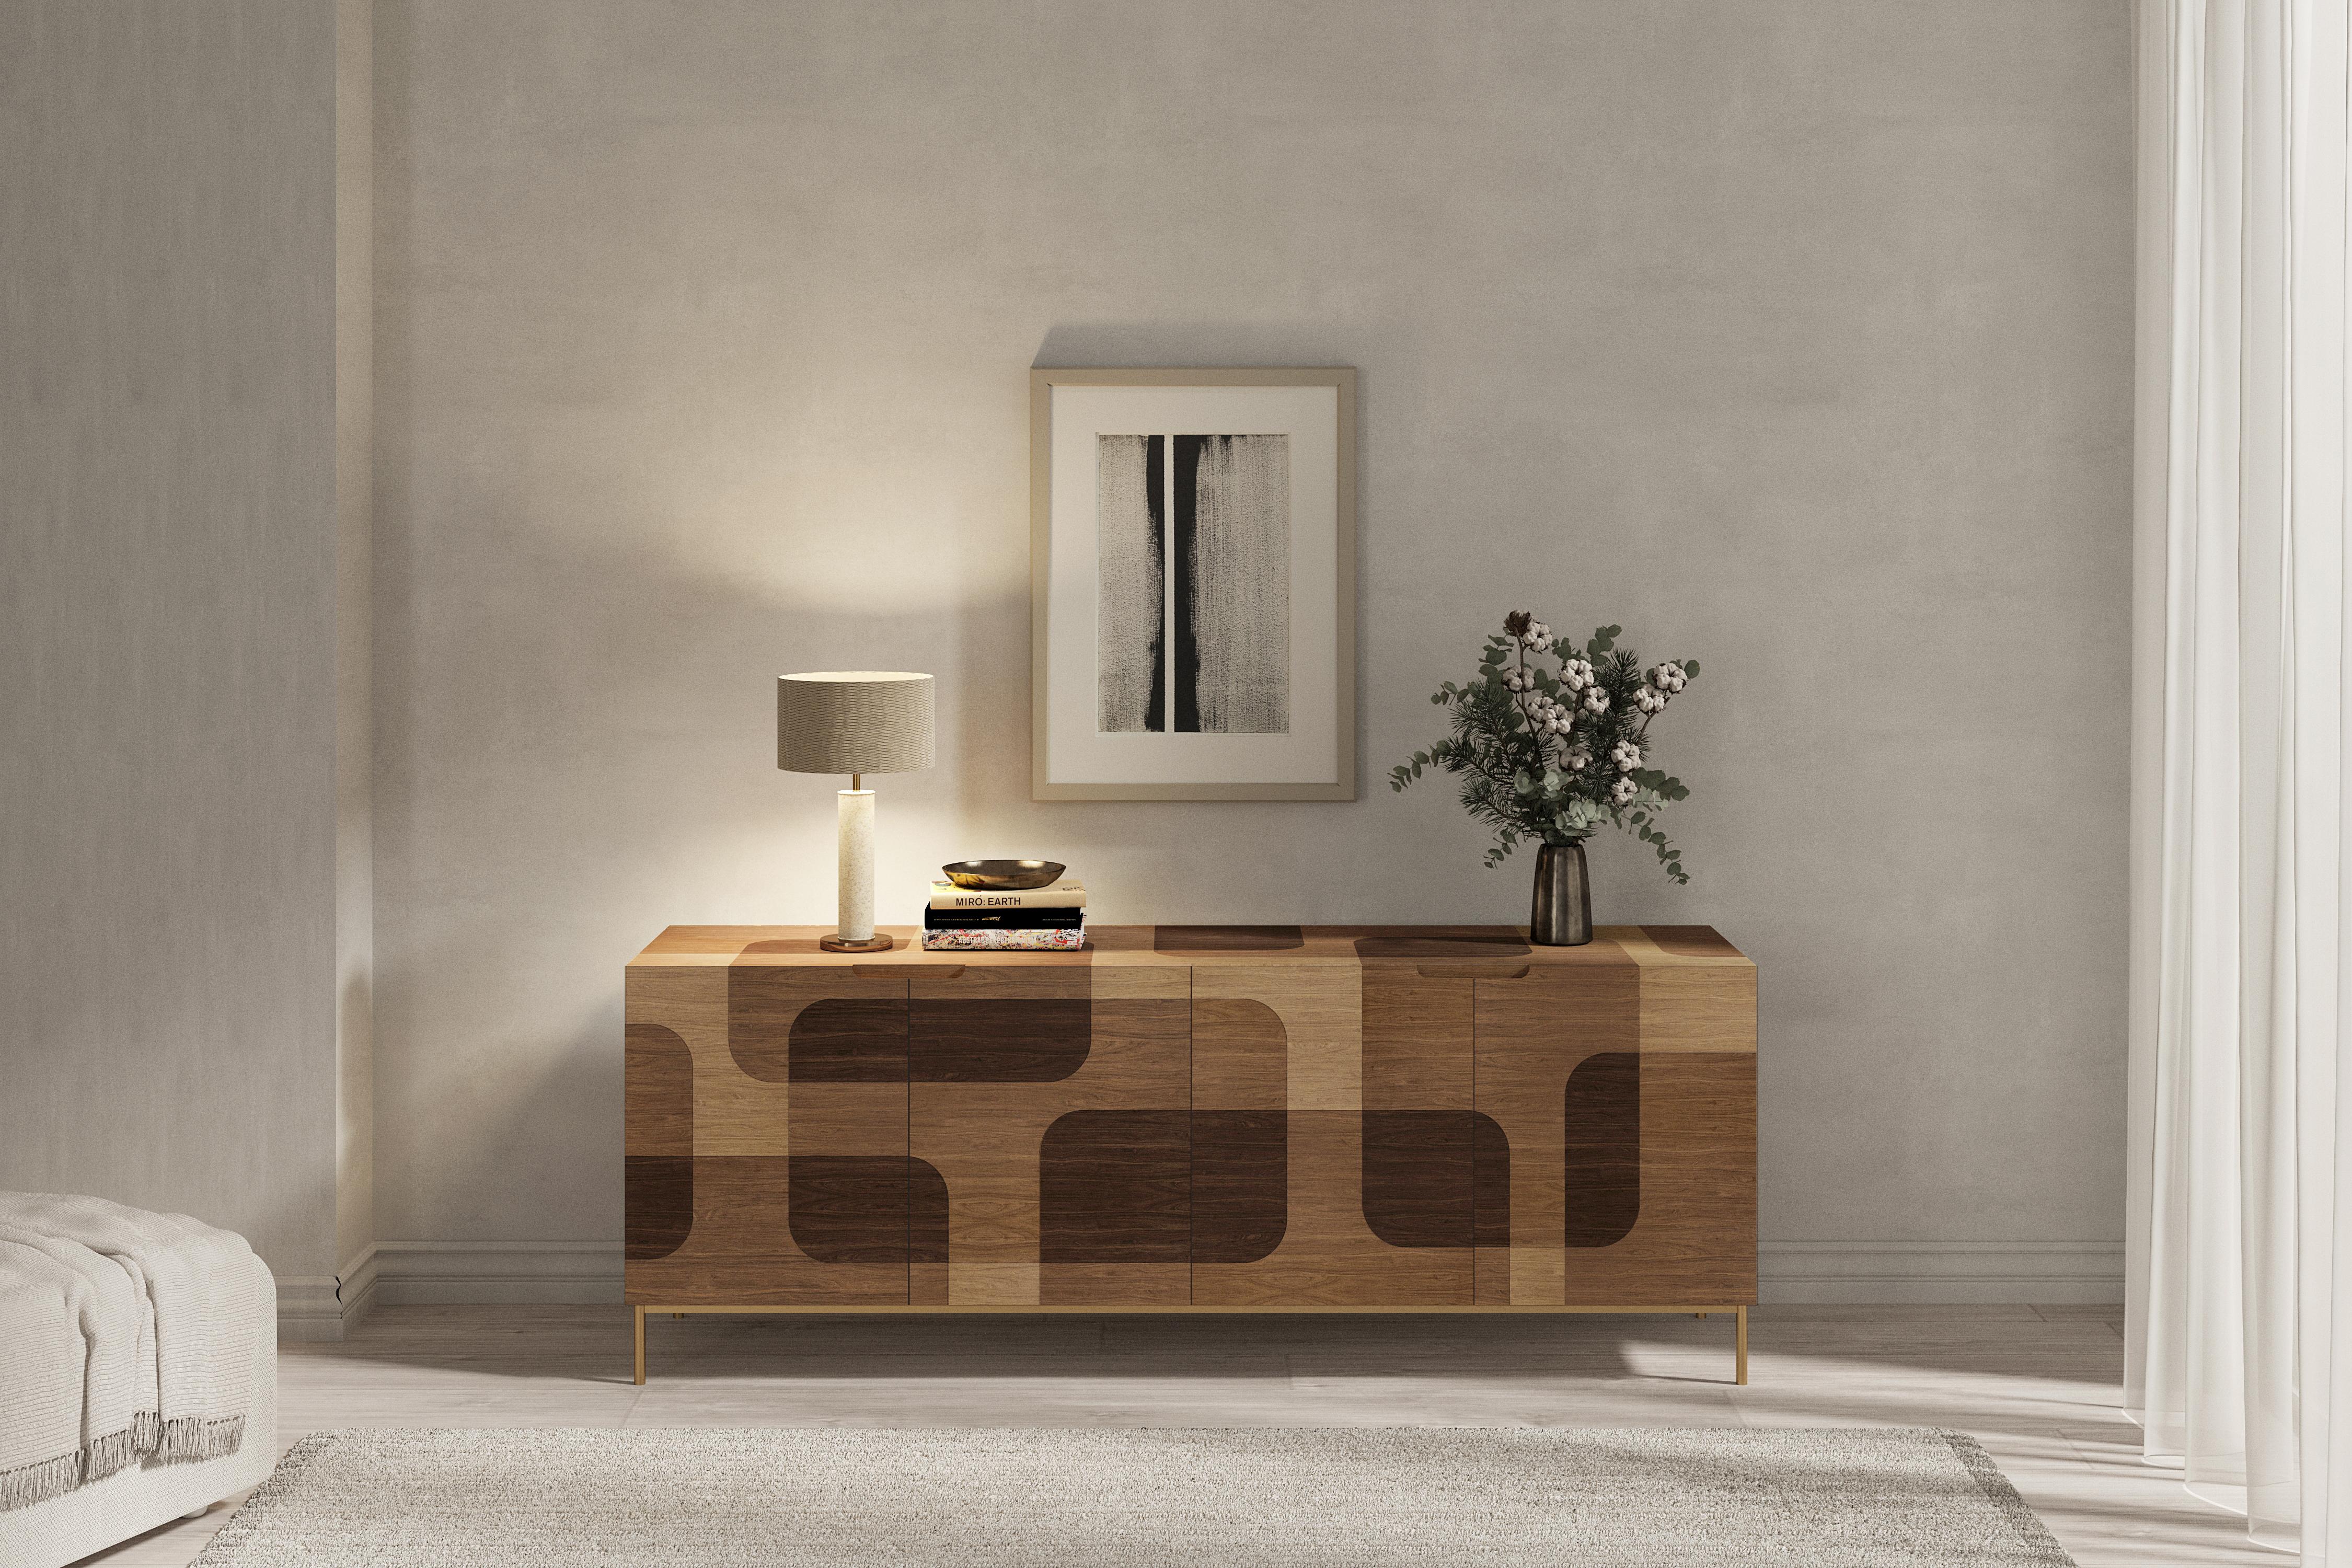 BODEGA CREDENZA

Bodega Collection refers to cellar art or better known as chiaroscuro, a technique of extreme contrast of light and shadow used by Caravaggio.

Credenza designed by Joel Escalona, configured with four doors and two internal drawers,